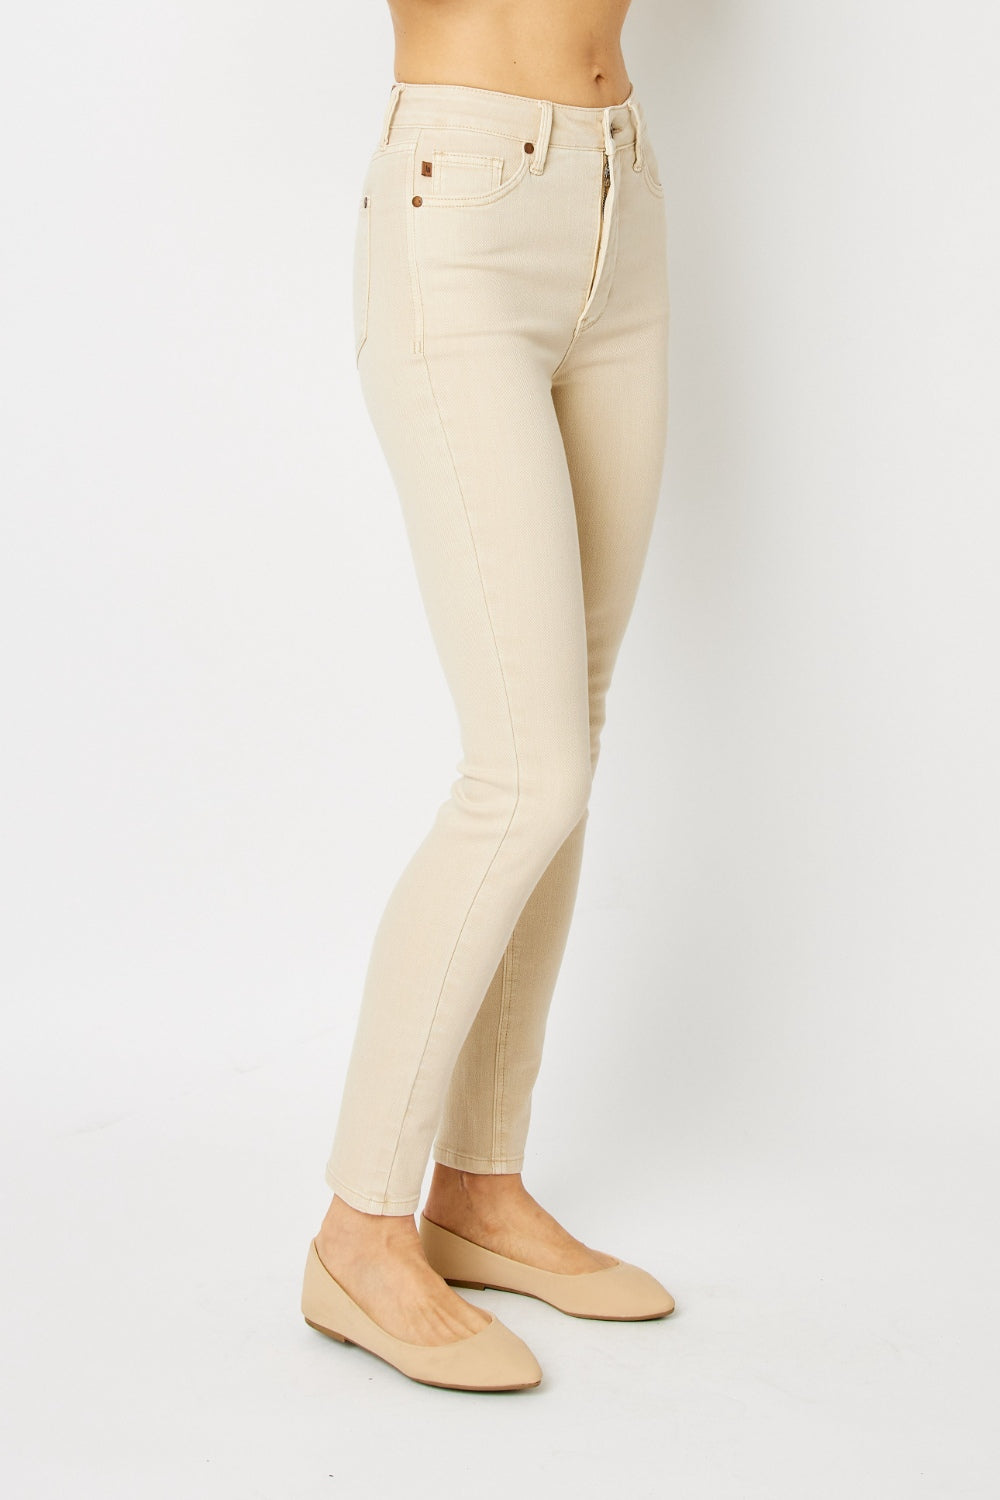 Introducing our new Garment Dyed Tummy Control Skinny Jeans. These jeans are designed to give you an effortlessly slim and flattering look. With their high-rise waist and tummy control panel, they provide the perfect amount of support and comfort.  1 - 22W